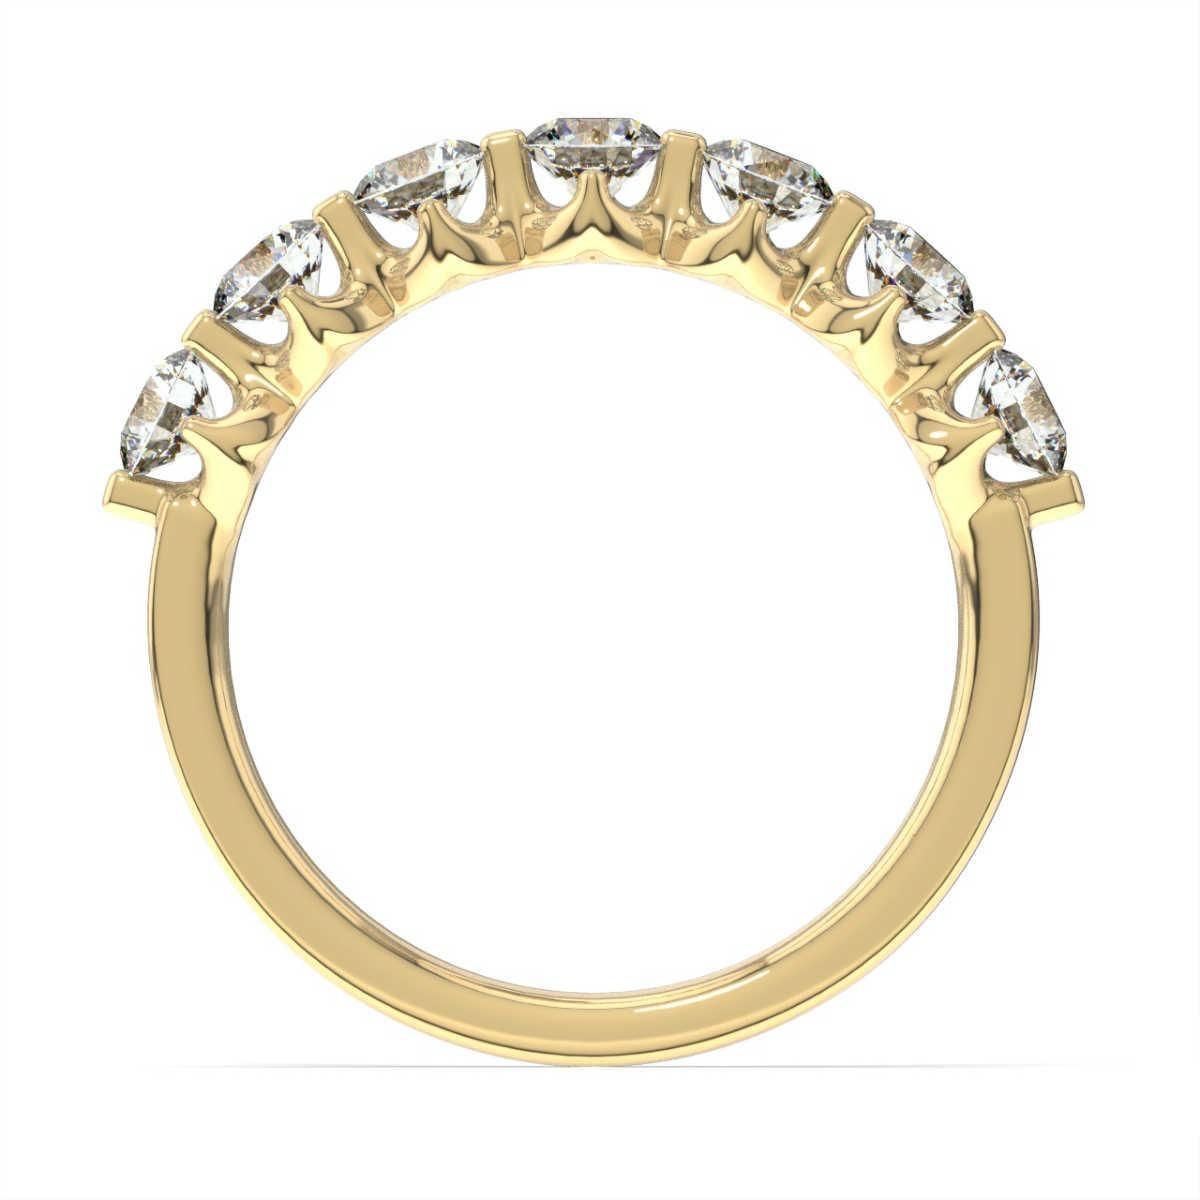 This ring features prong share 7 round brilliant diamonds. Experience the difference!

Product details: 

Center Gemstone Color: WHITE
Side Gemstone Type: NATURAL DIAMOND
Side Gemstone Shape: ROUND
Metal: 14K Yellow Gold
Metal Weight: 2.21
Setting